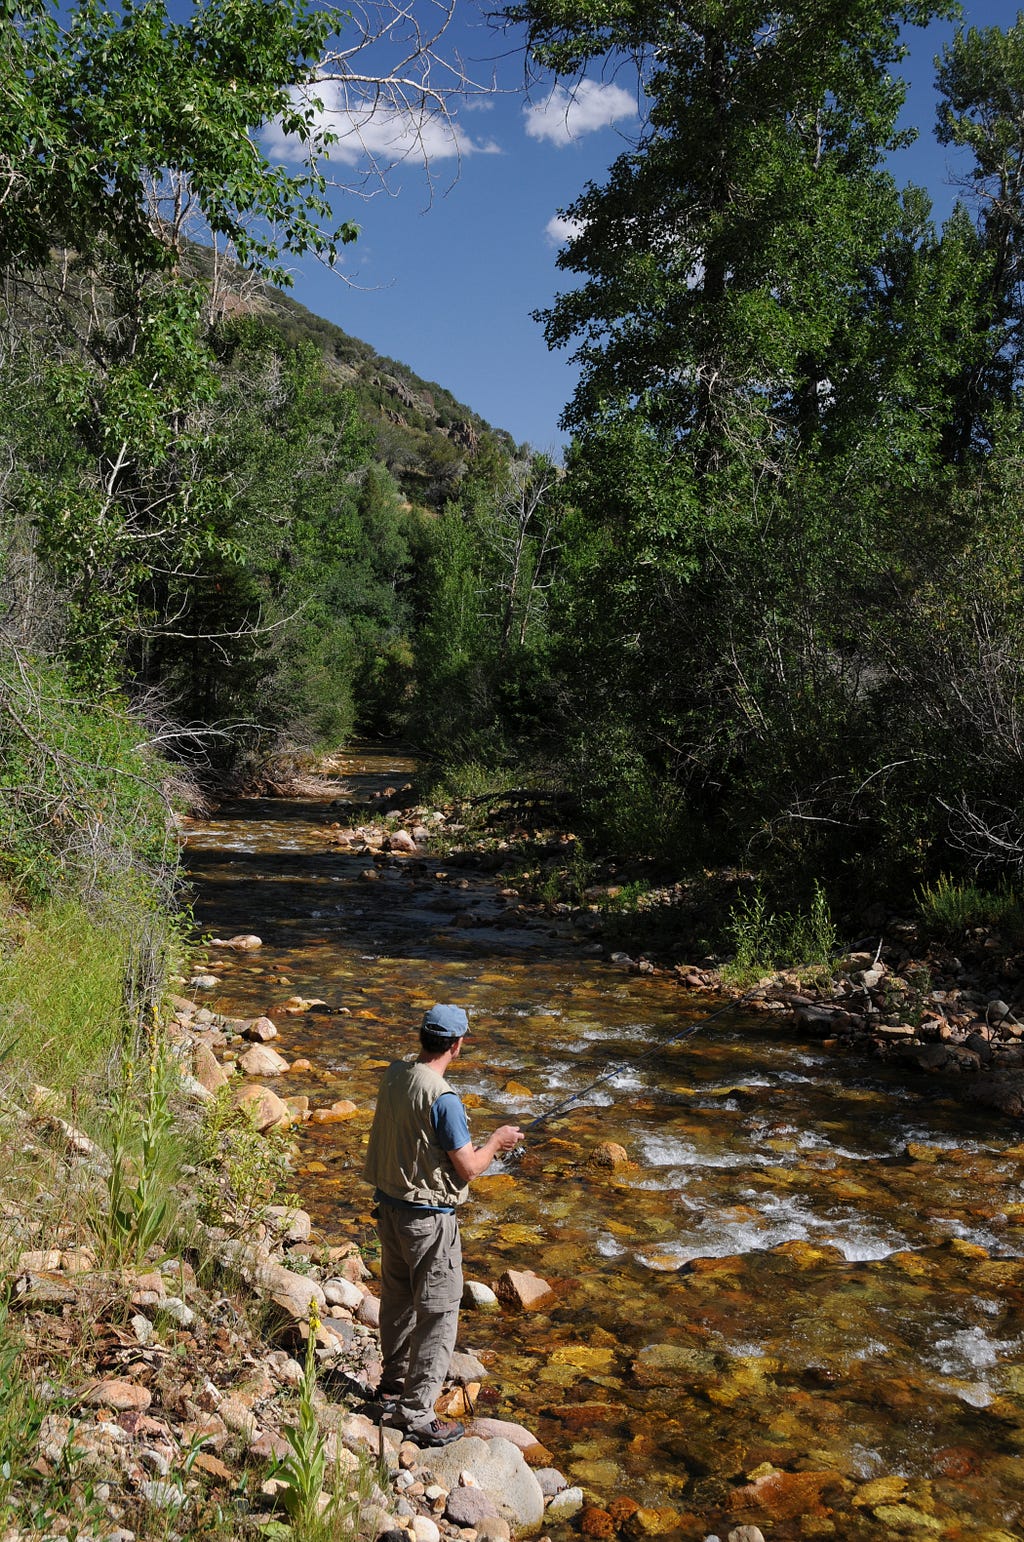 The writer’s husband fished for trout in the upper reaches of the West Fork of the Jarbidge River.